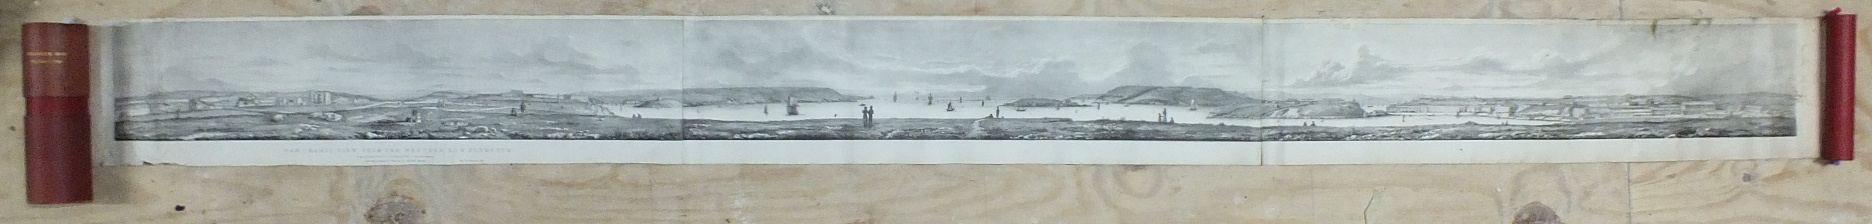 Panoramic View from the Western Hoe, Plymouth, Drawn from Nature & on Stone by H Worsley 1826,